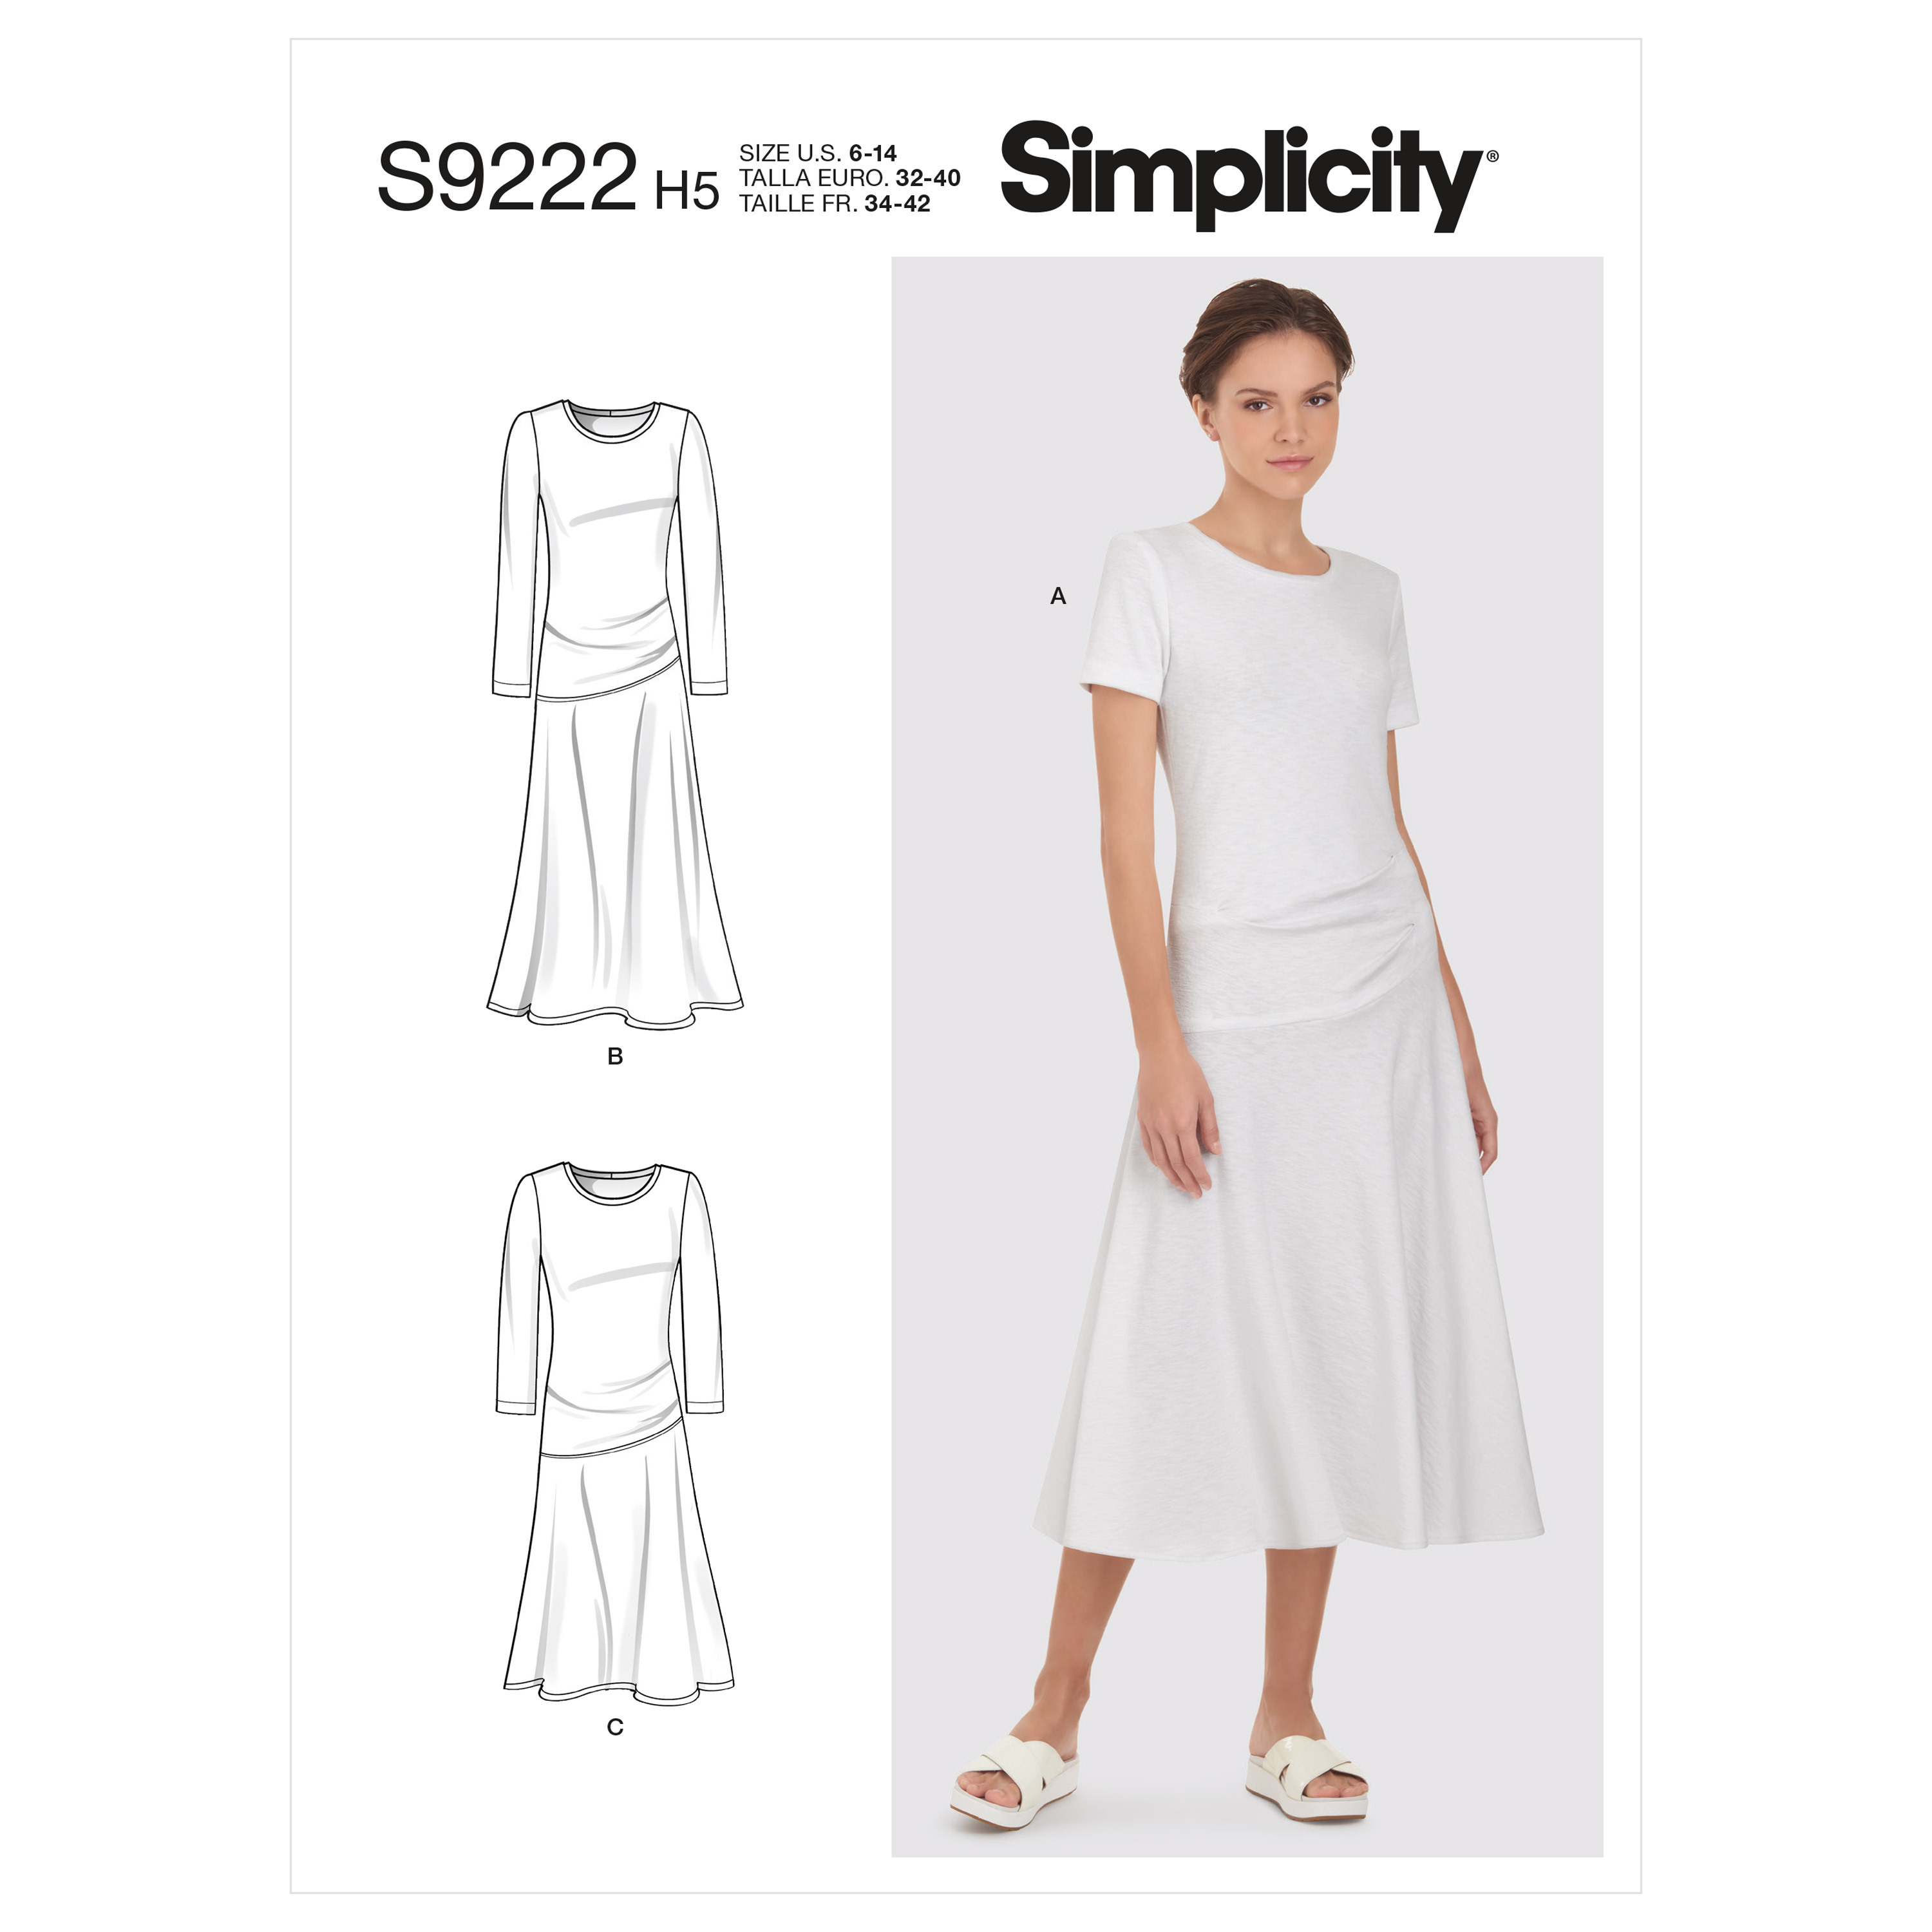 S9222 MISSES' KNIT DRESS Simplicity Sewing Pattern 9222